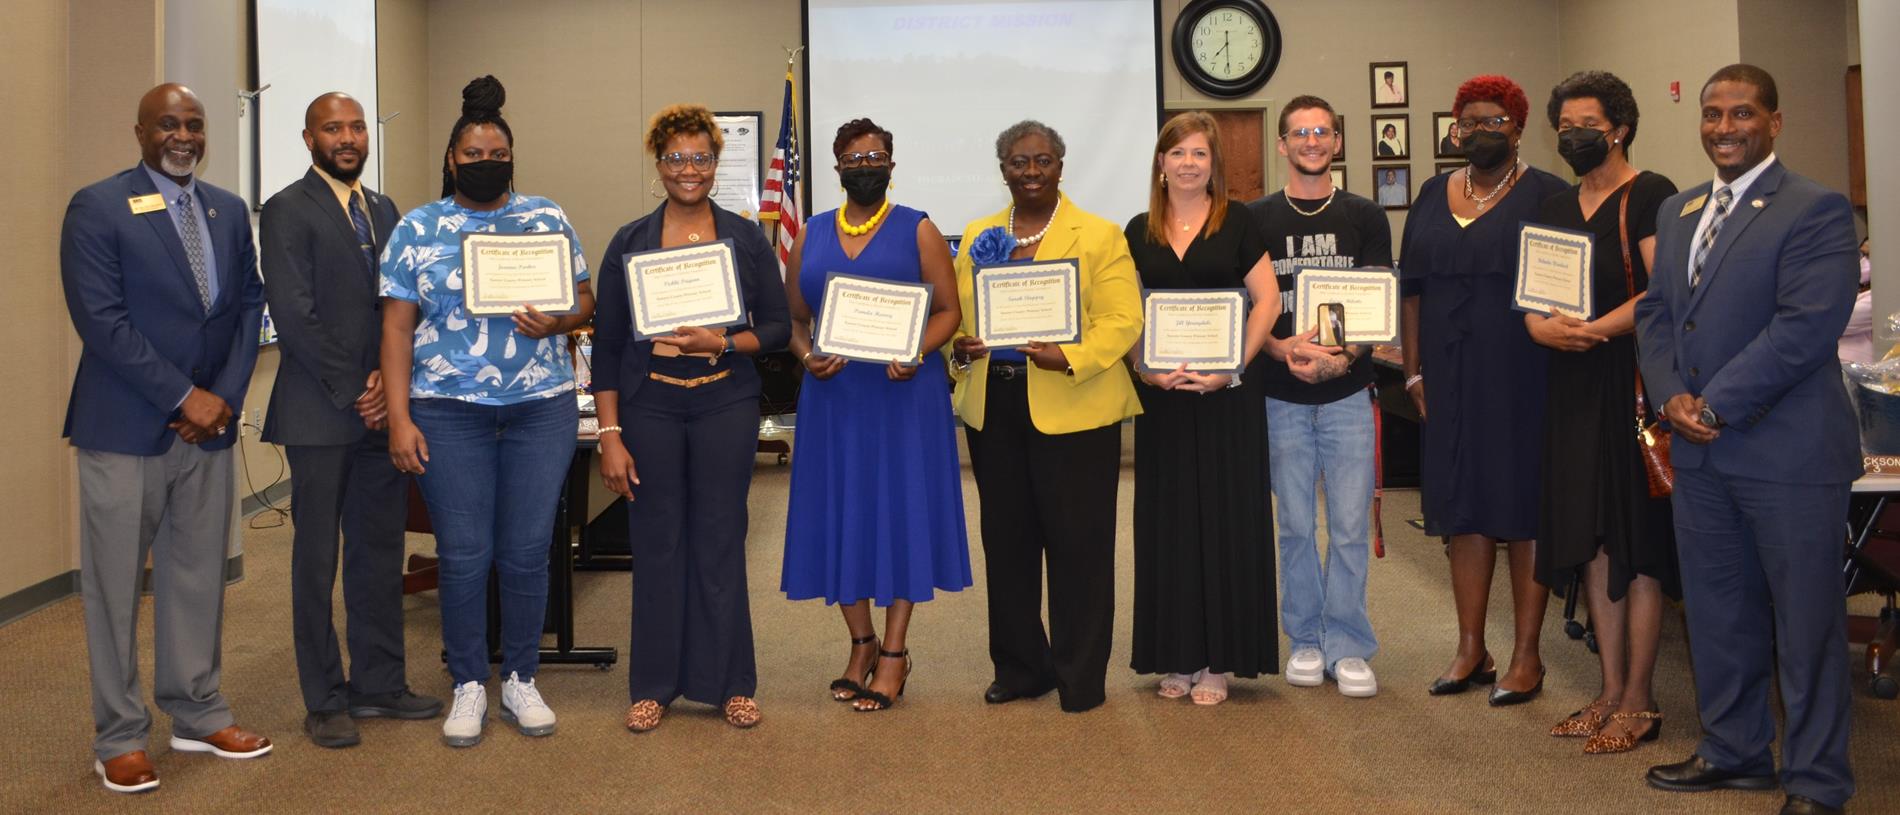 September BOE Honorees from SCPS